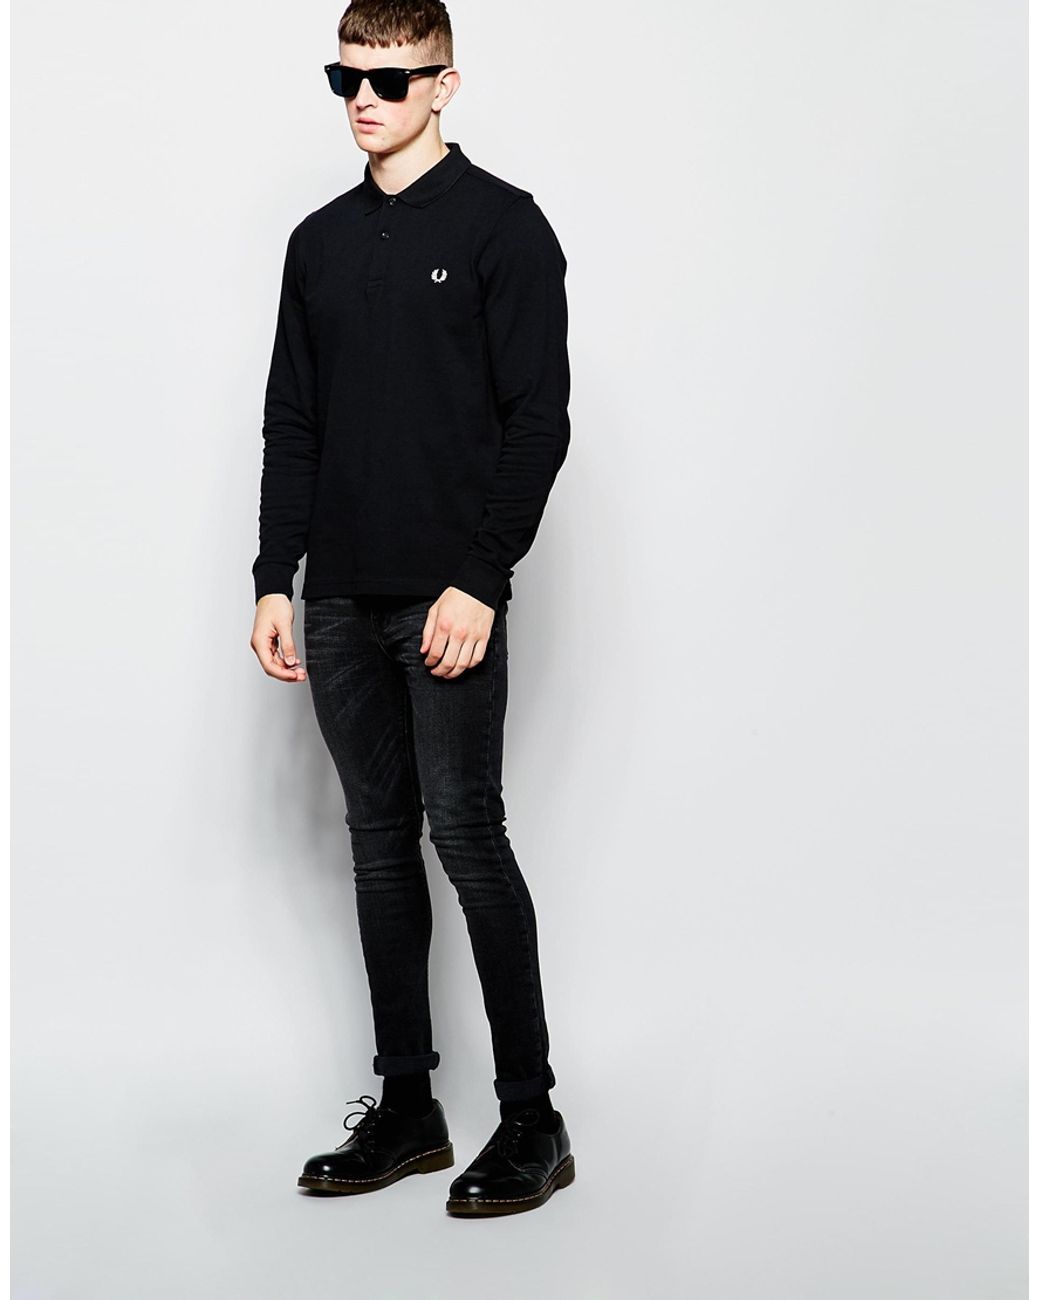 Fred Perry Black Long Sleeve Shirt | vlr.eng.br